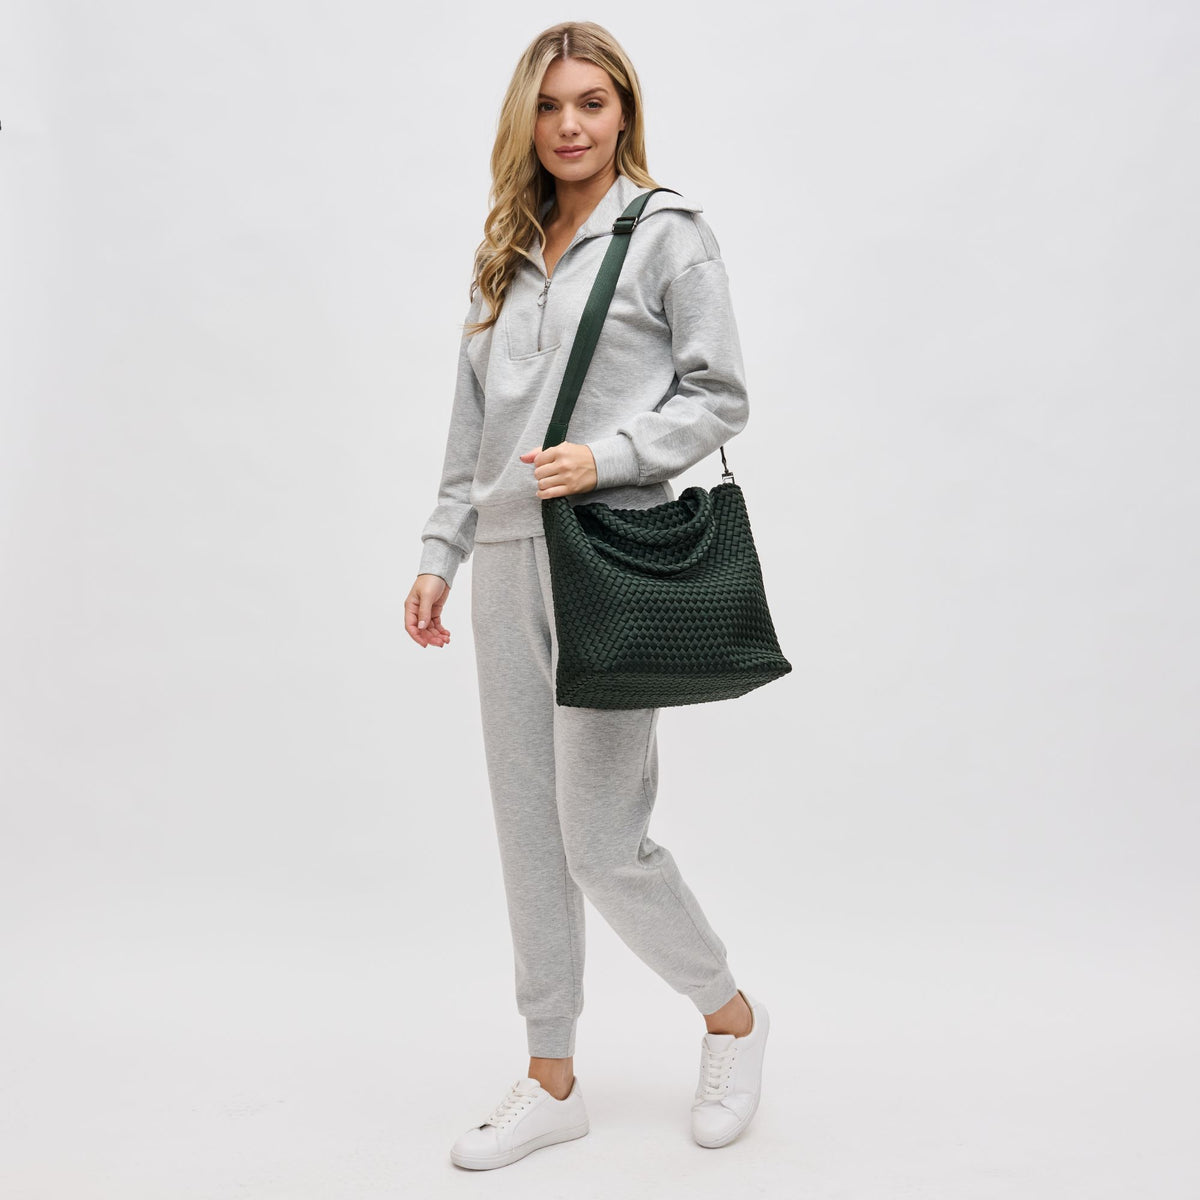 Woman wearing Olive Sol and Selene Sky's The Limit - Medium Tote 841764108843 View 4 | Olive